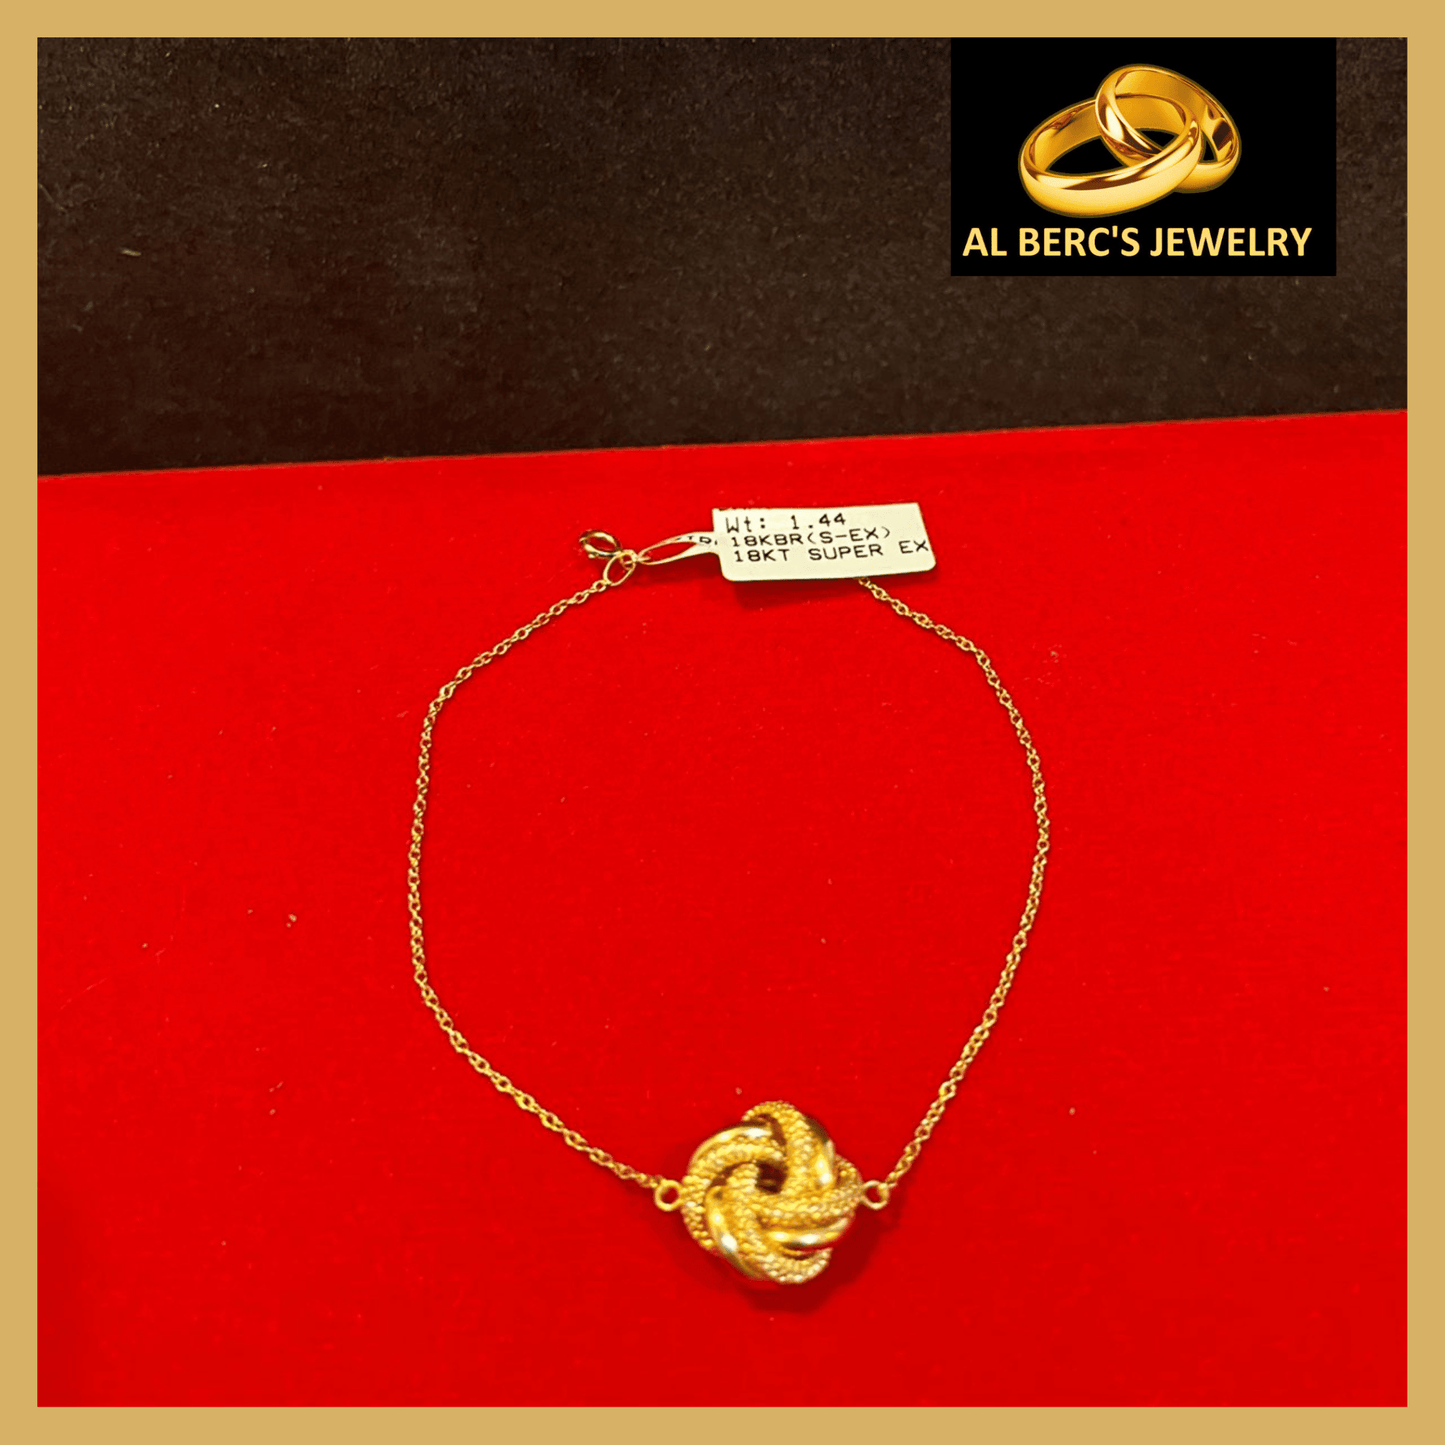 showing an 18K Gold Bracelet for Women with Cinnamon pendant